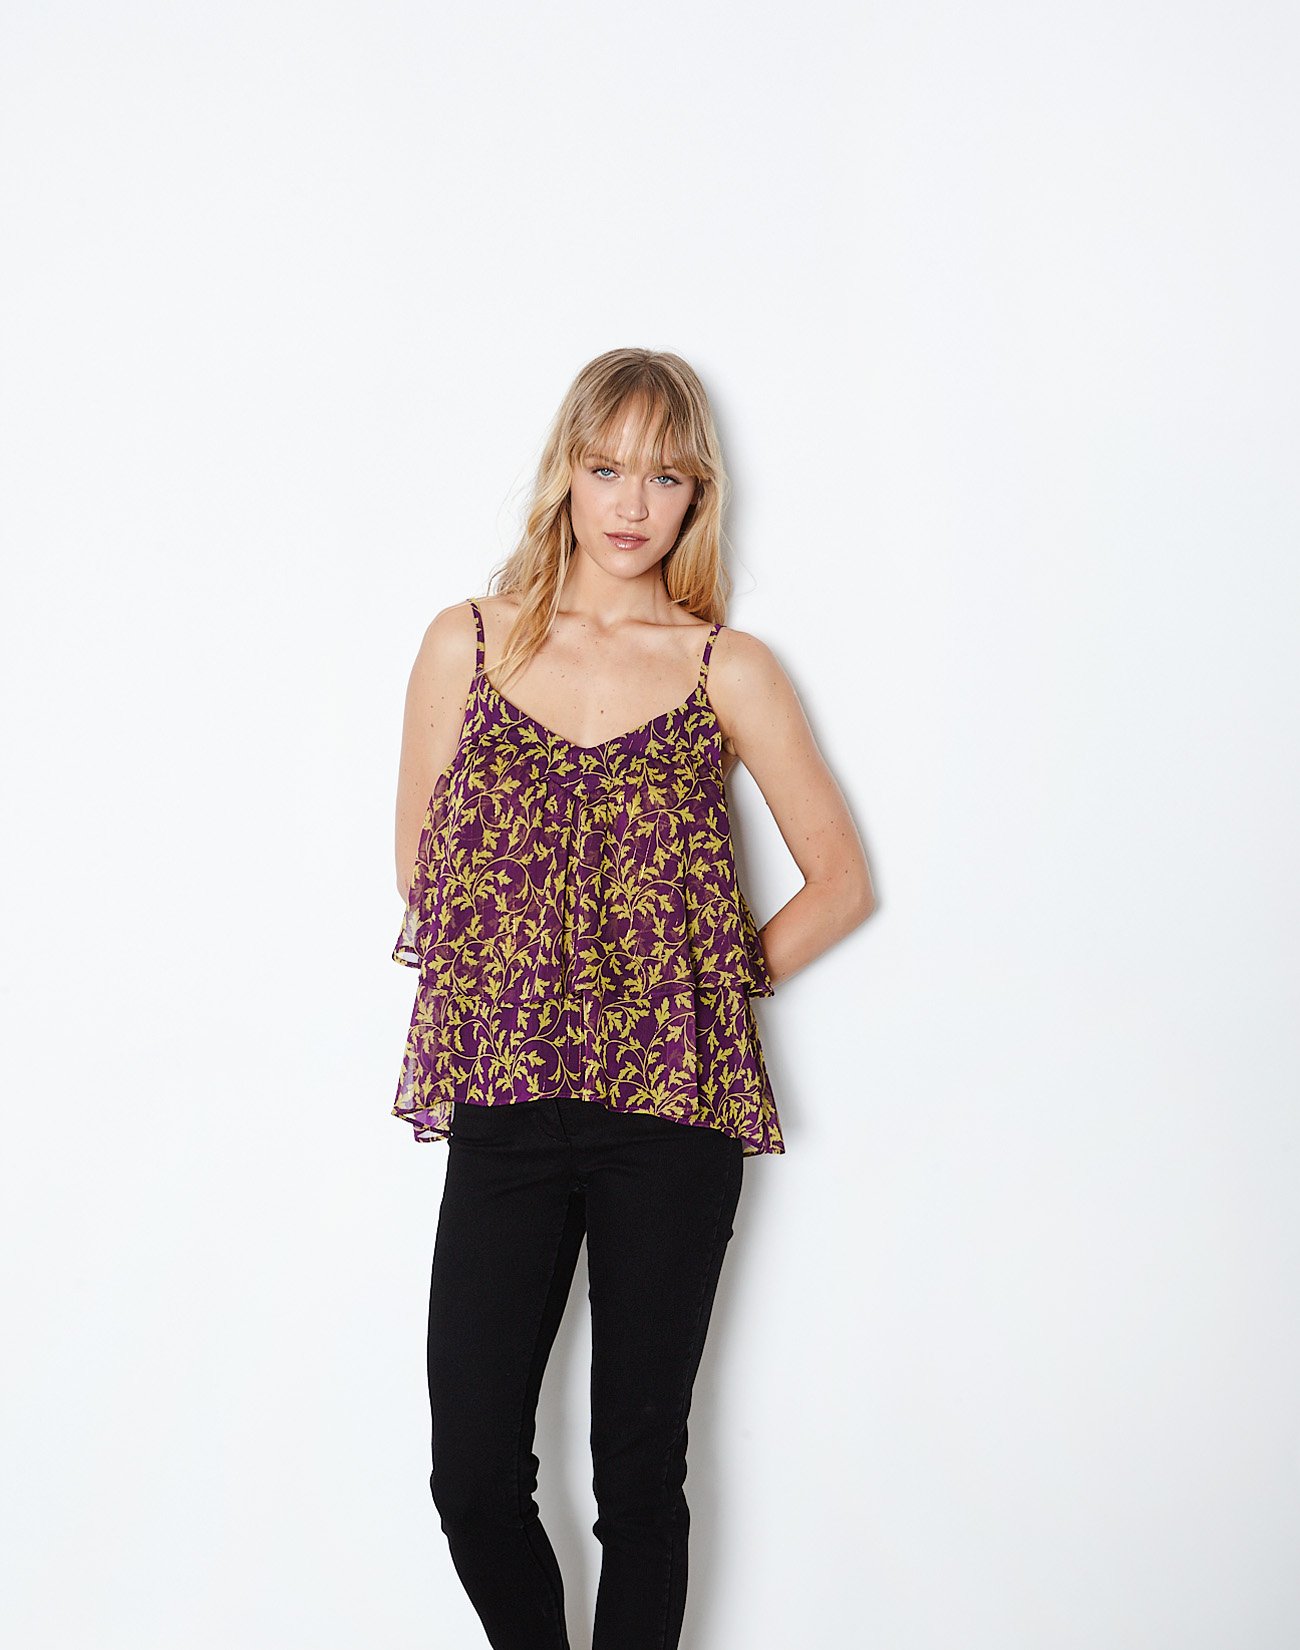 Printed lingerie style top